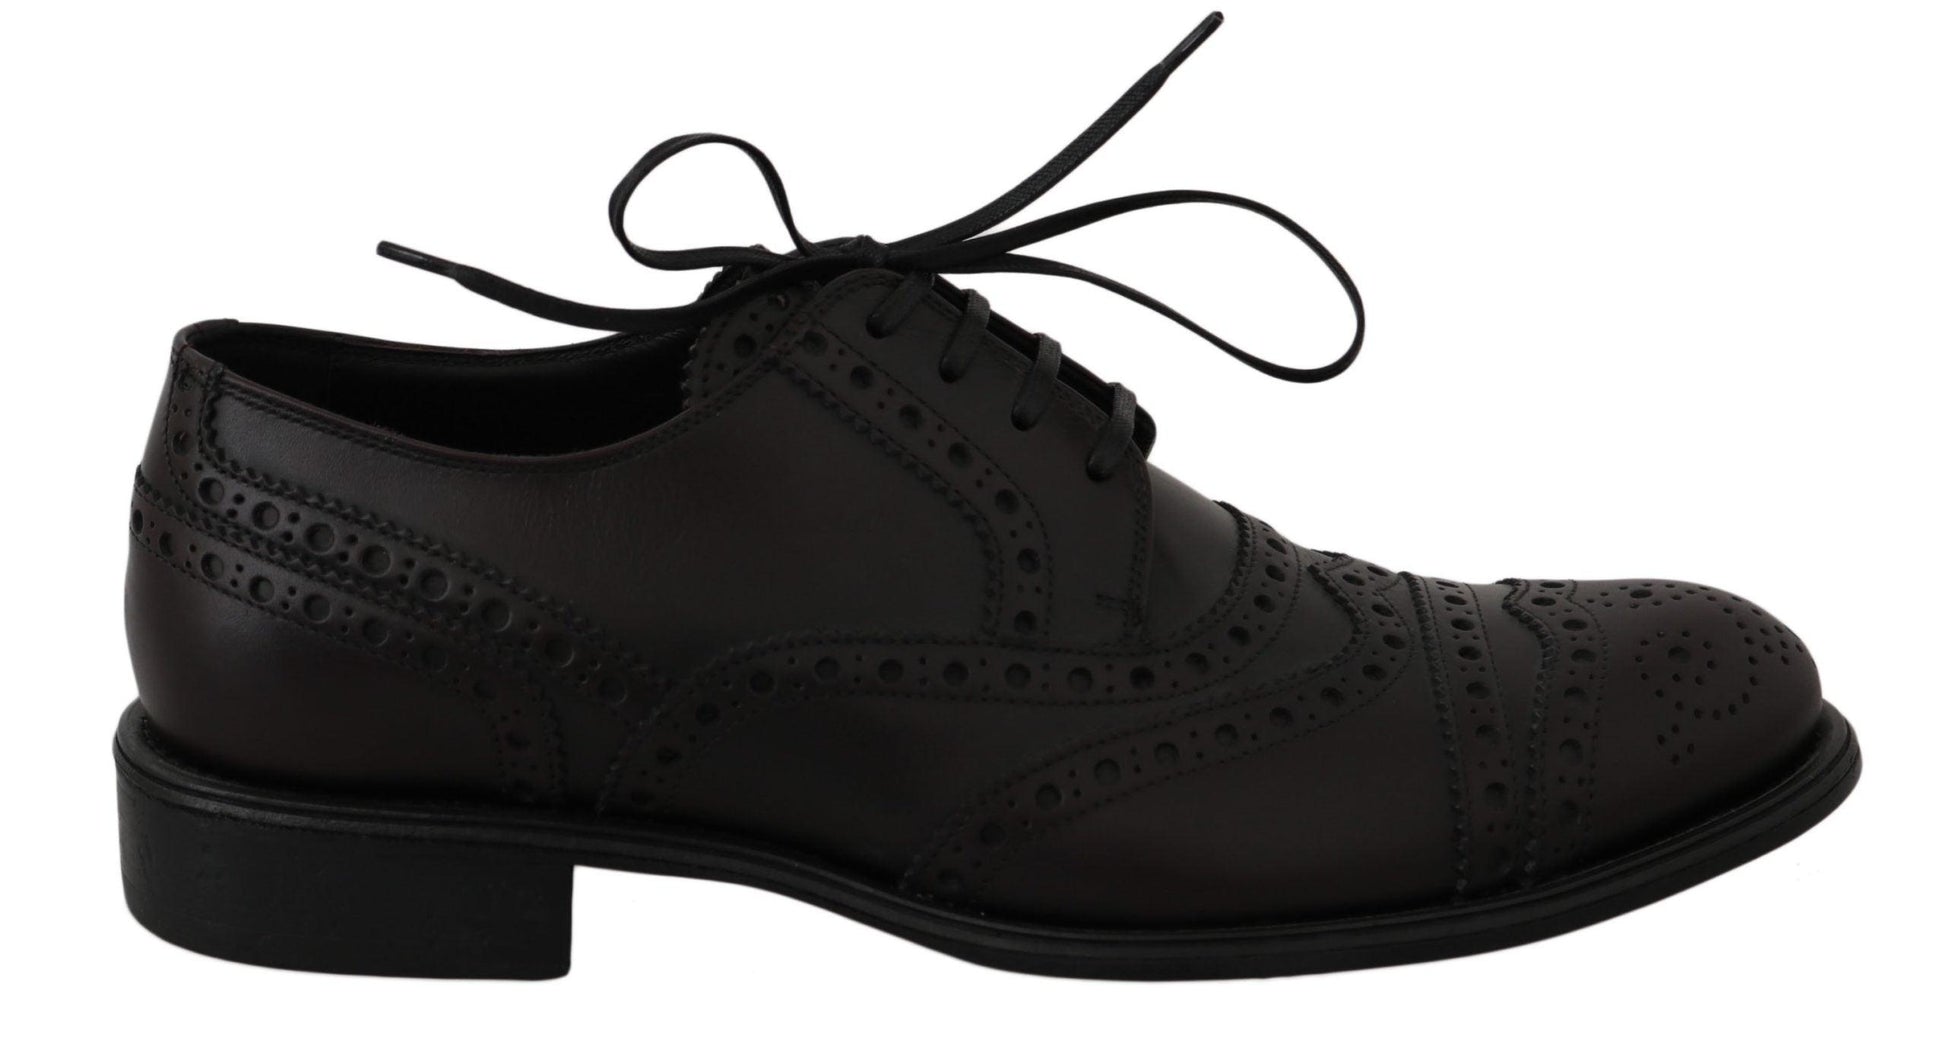 Dolce & Gabbana Black Leather Wingtip Oxford Dress  Shoes - Designed by Dolce & Gabbana Available to Buy at a Discounted Price on Moon Behind The Hill Online Designer Discount Store